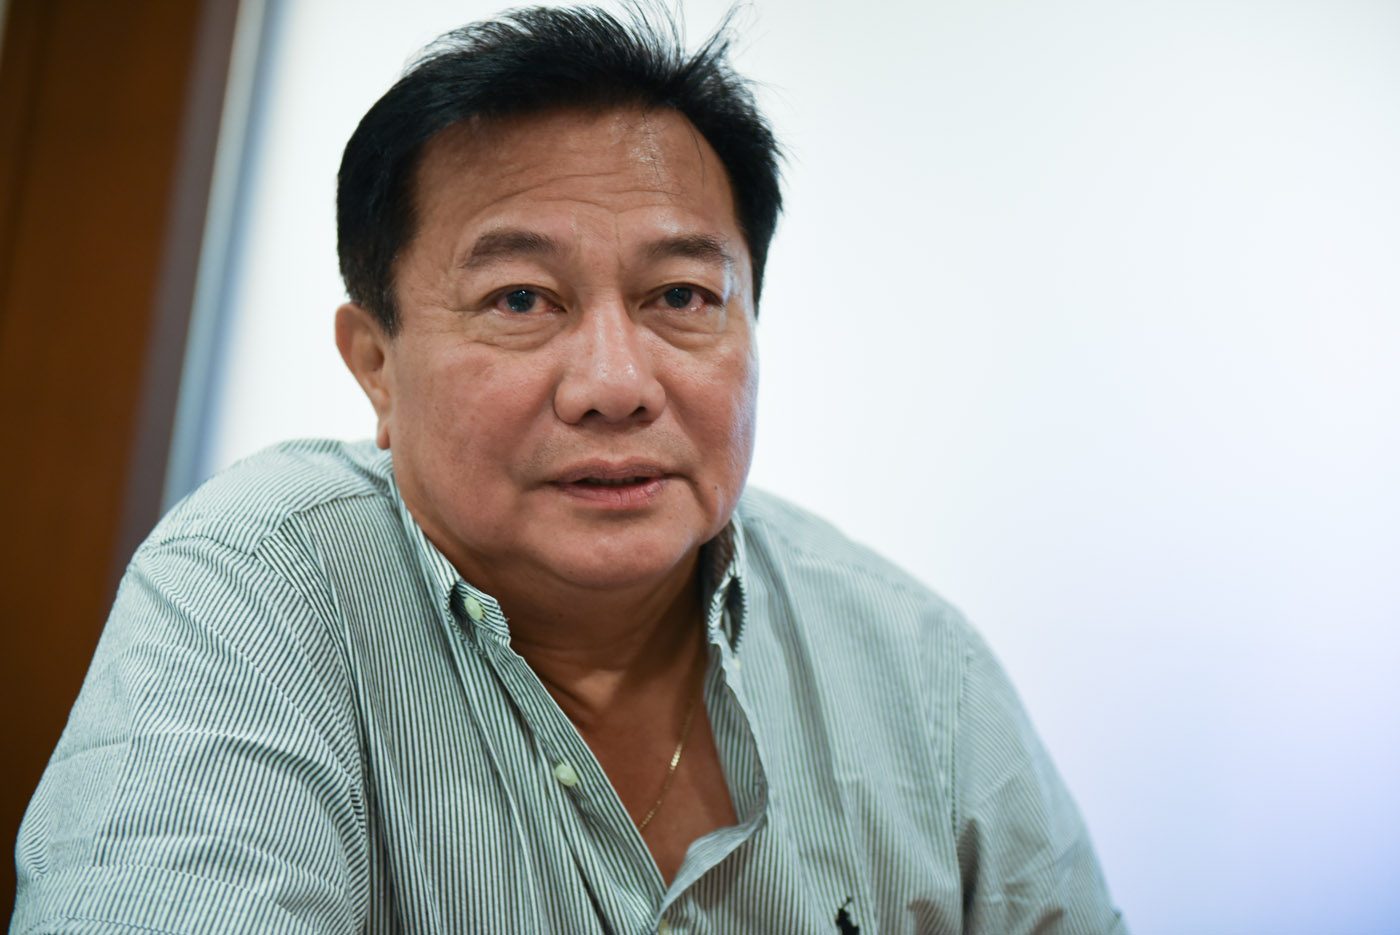 Alvarez to his ouster ‘plotters’: ‘Go ahead, make my day’